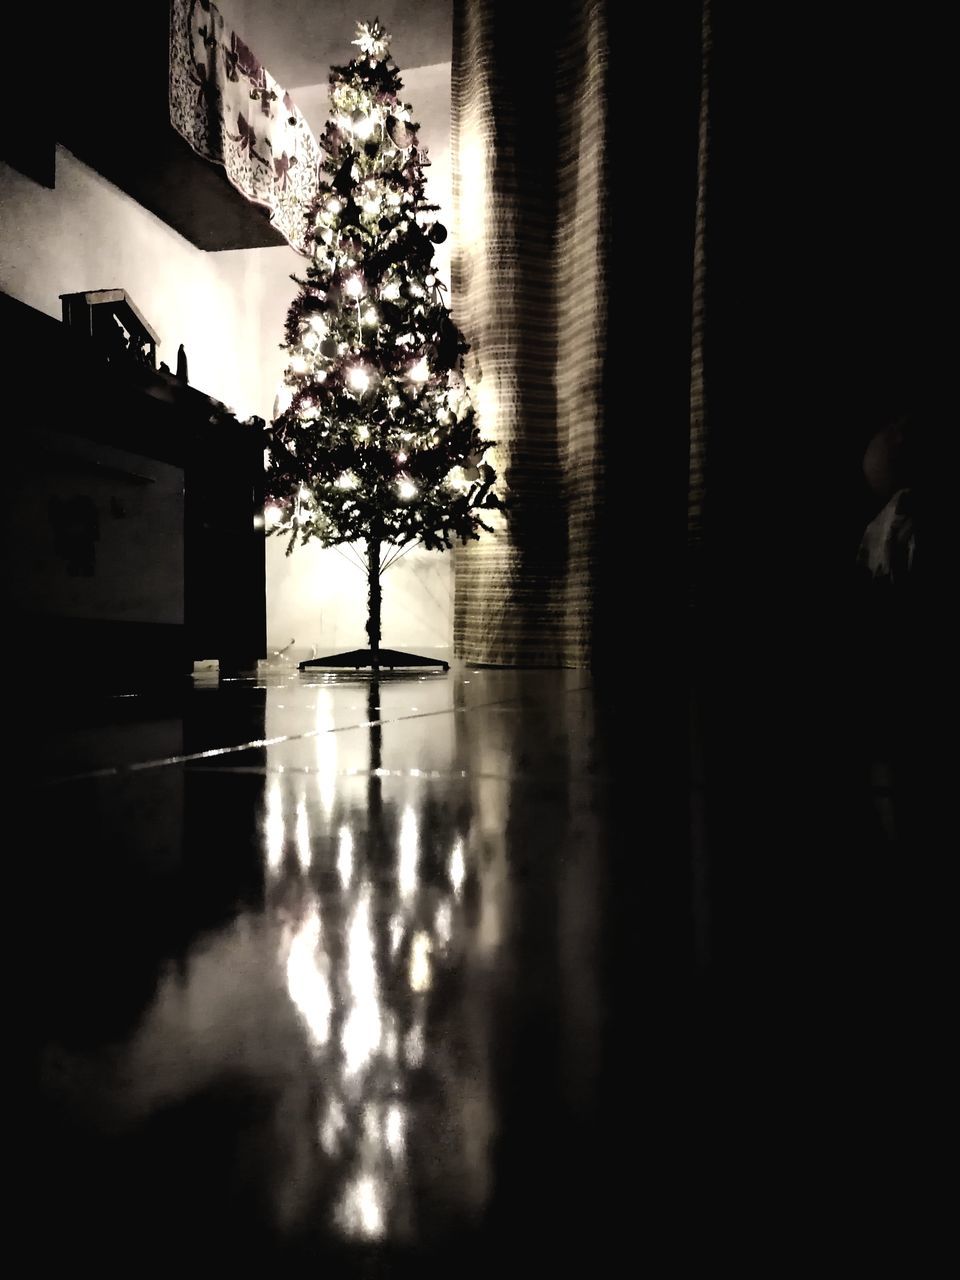 darkness, light, reflection, black, night, white, tree, architecture, nature, built structure, plant, no people, lighting, indoors, water, black and white, monochrome, decoration, silhouette, building, christmas tree, monochrome photography